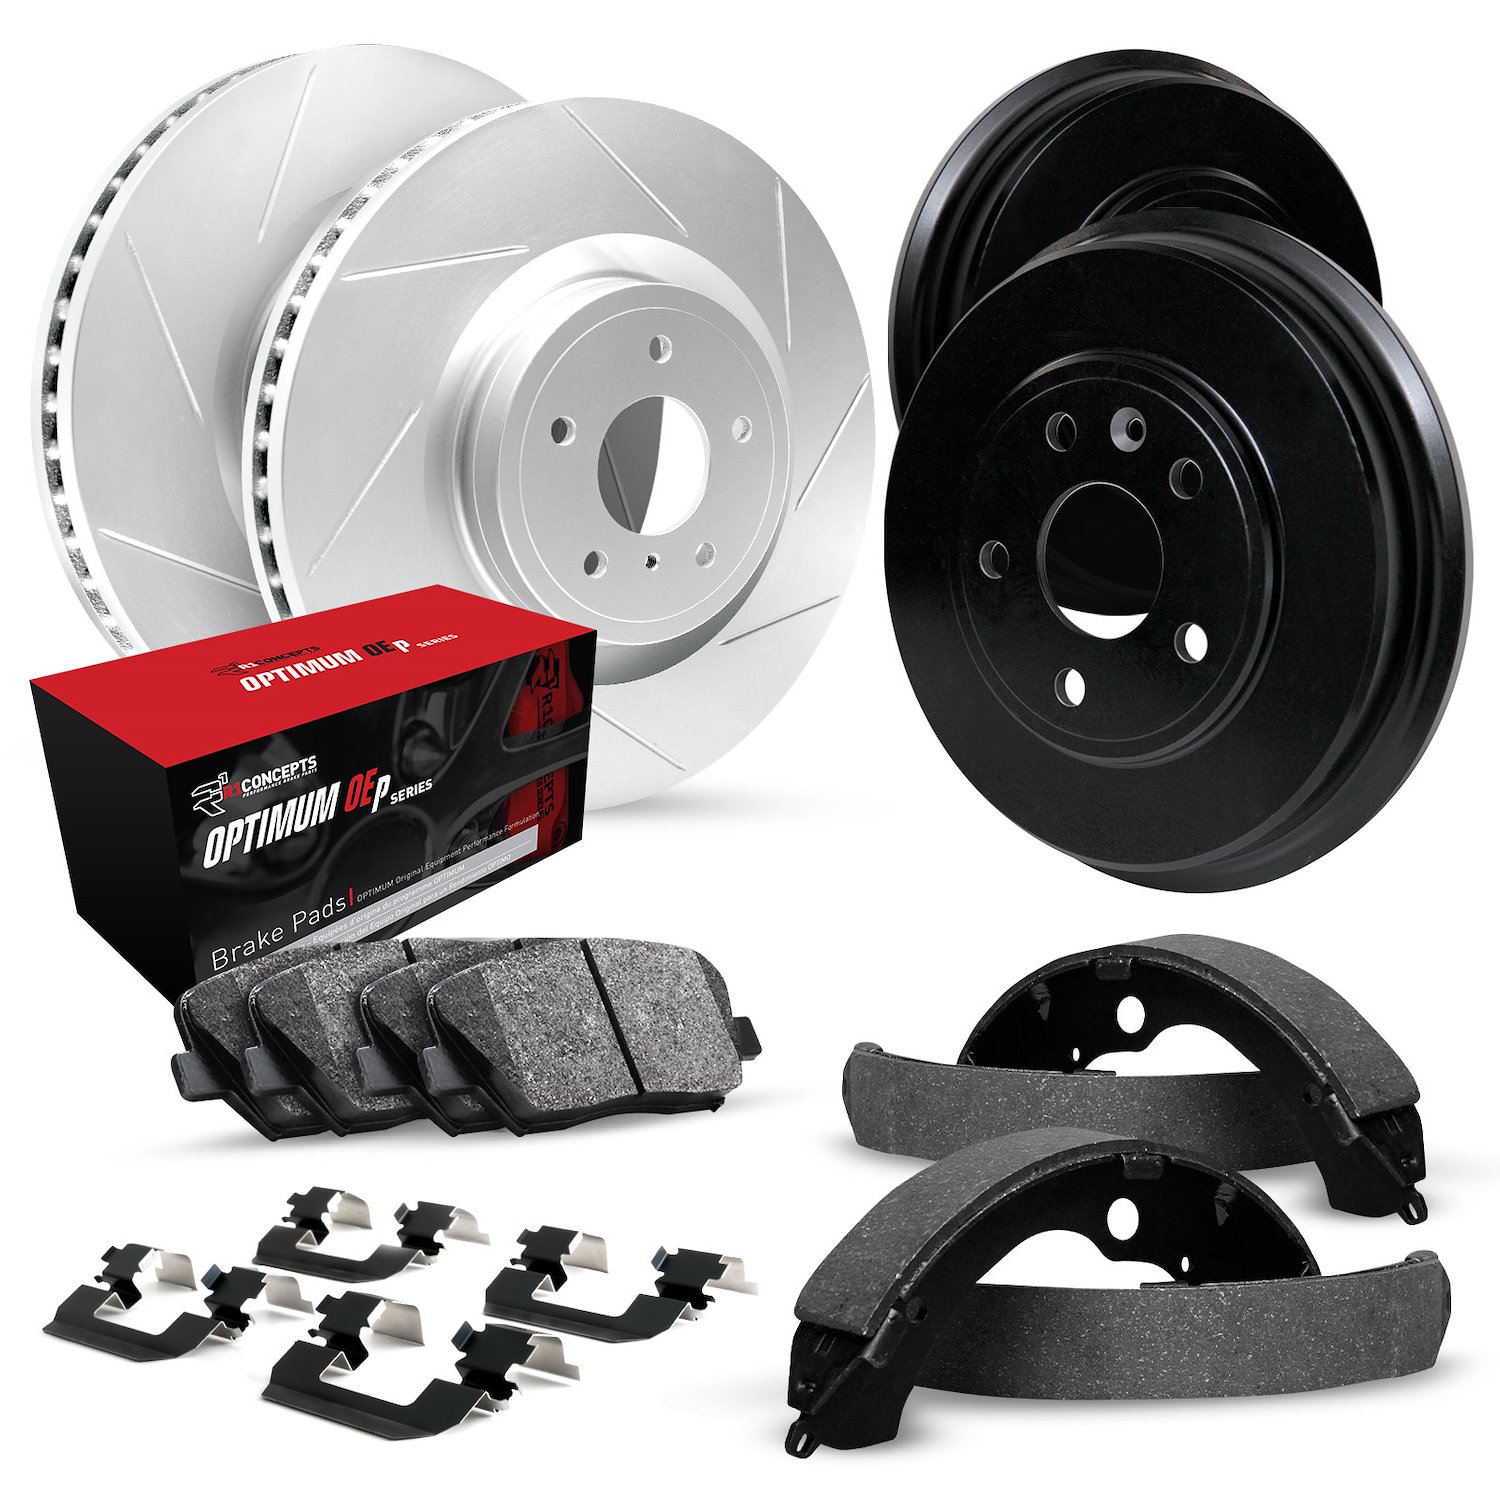 GEO-Carbon Slotted Brake Rotor & Drum Set w/Optimum OE Pads, Shoes, & Hardware, 1999-2003 Ford/Lincoln/Mercury/Mazda